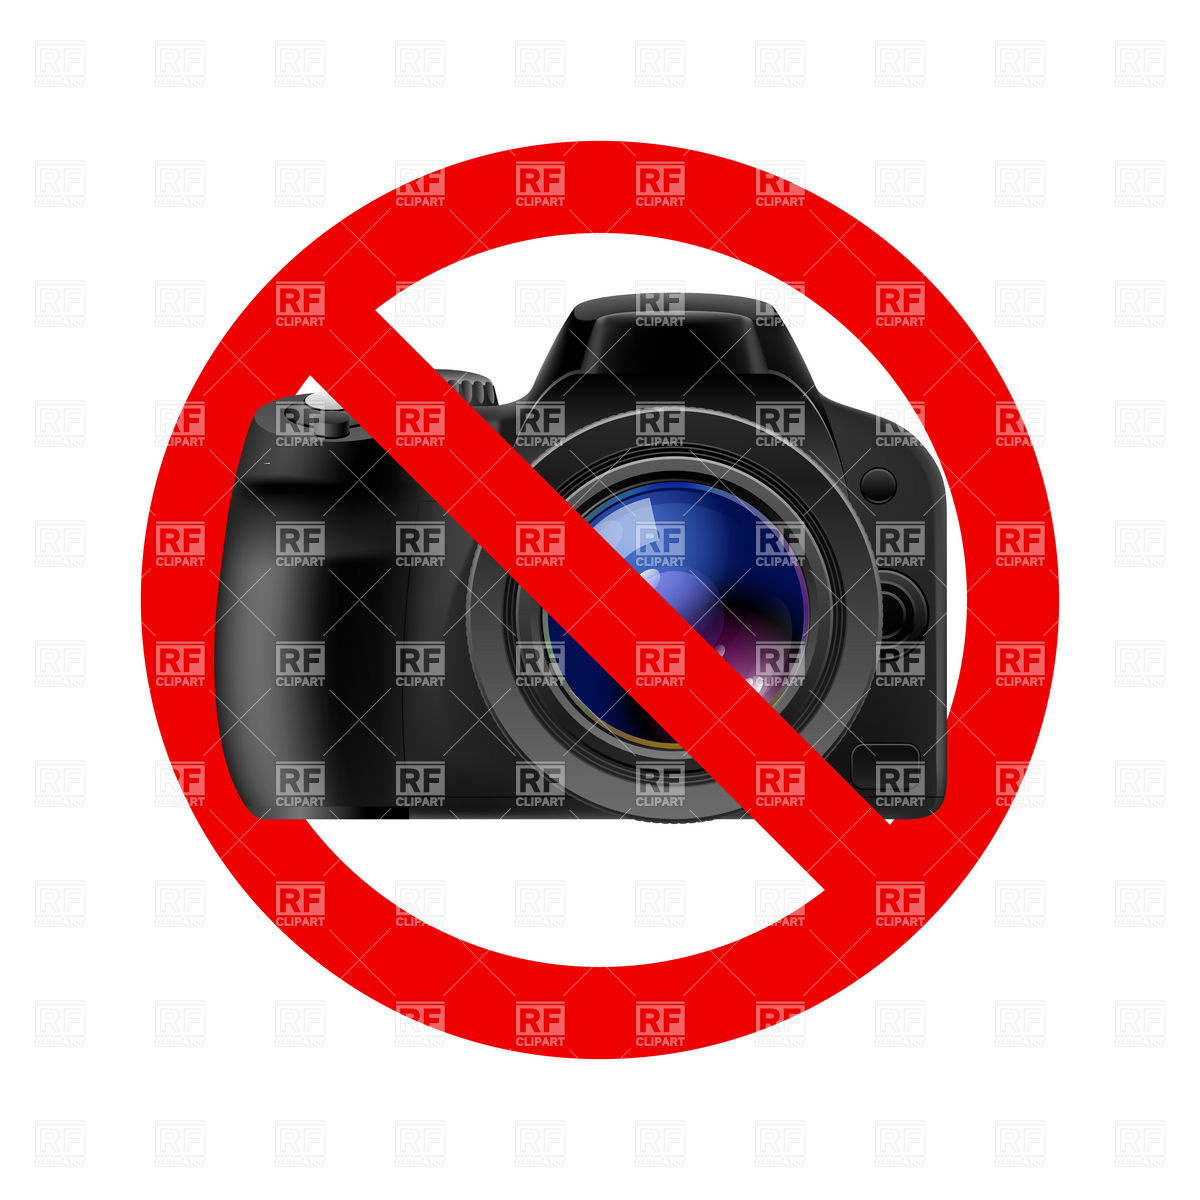 No Camera And Photo Allowed Sign Download Royalty Free Vector Clipart